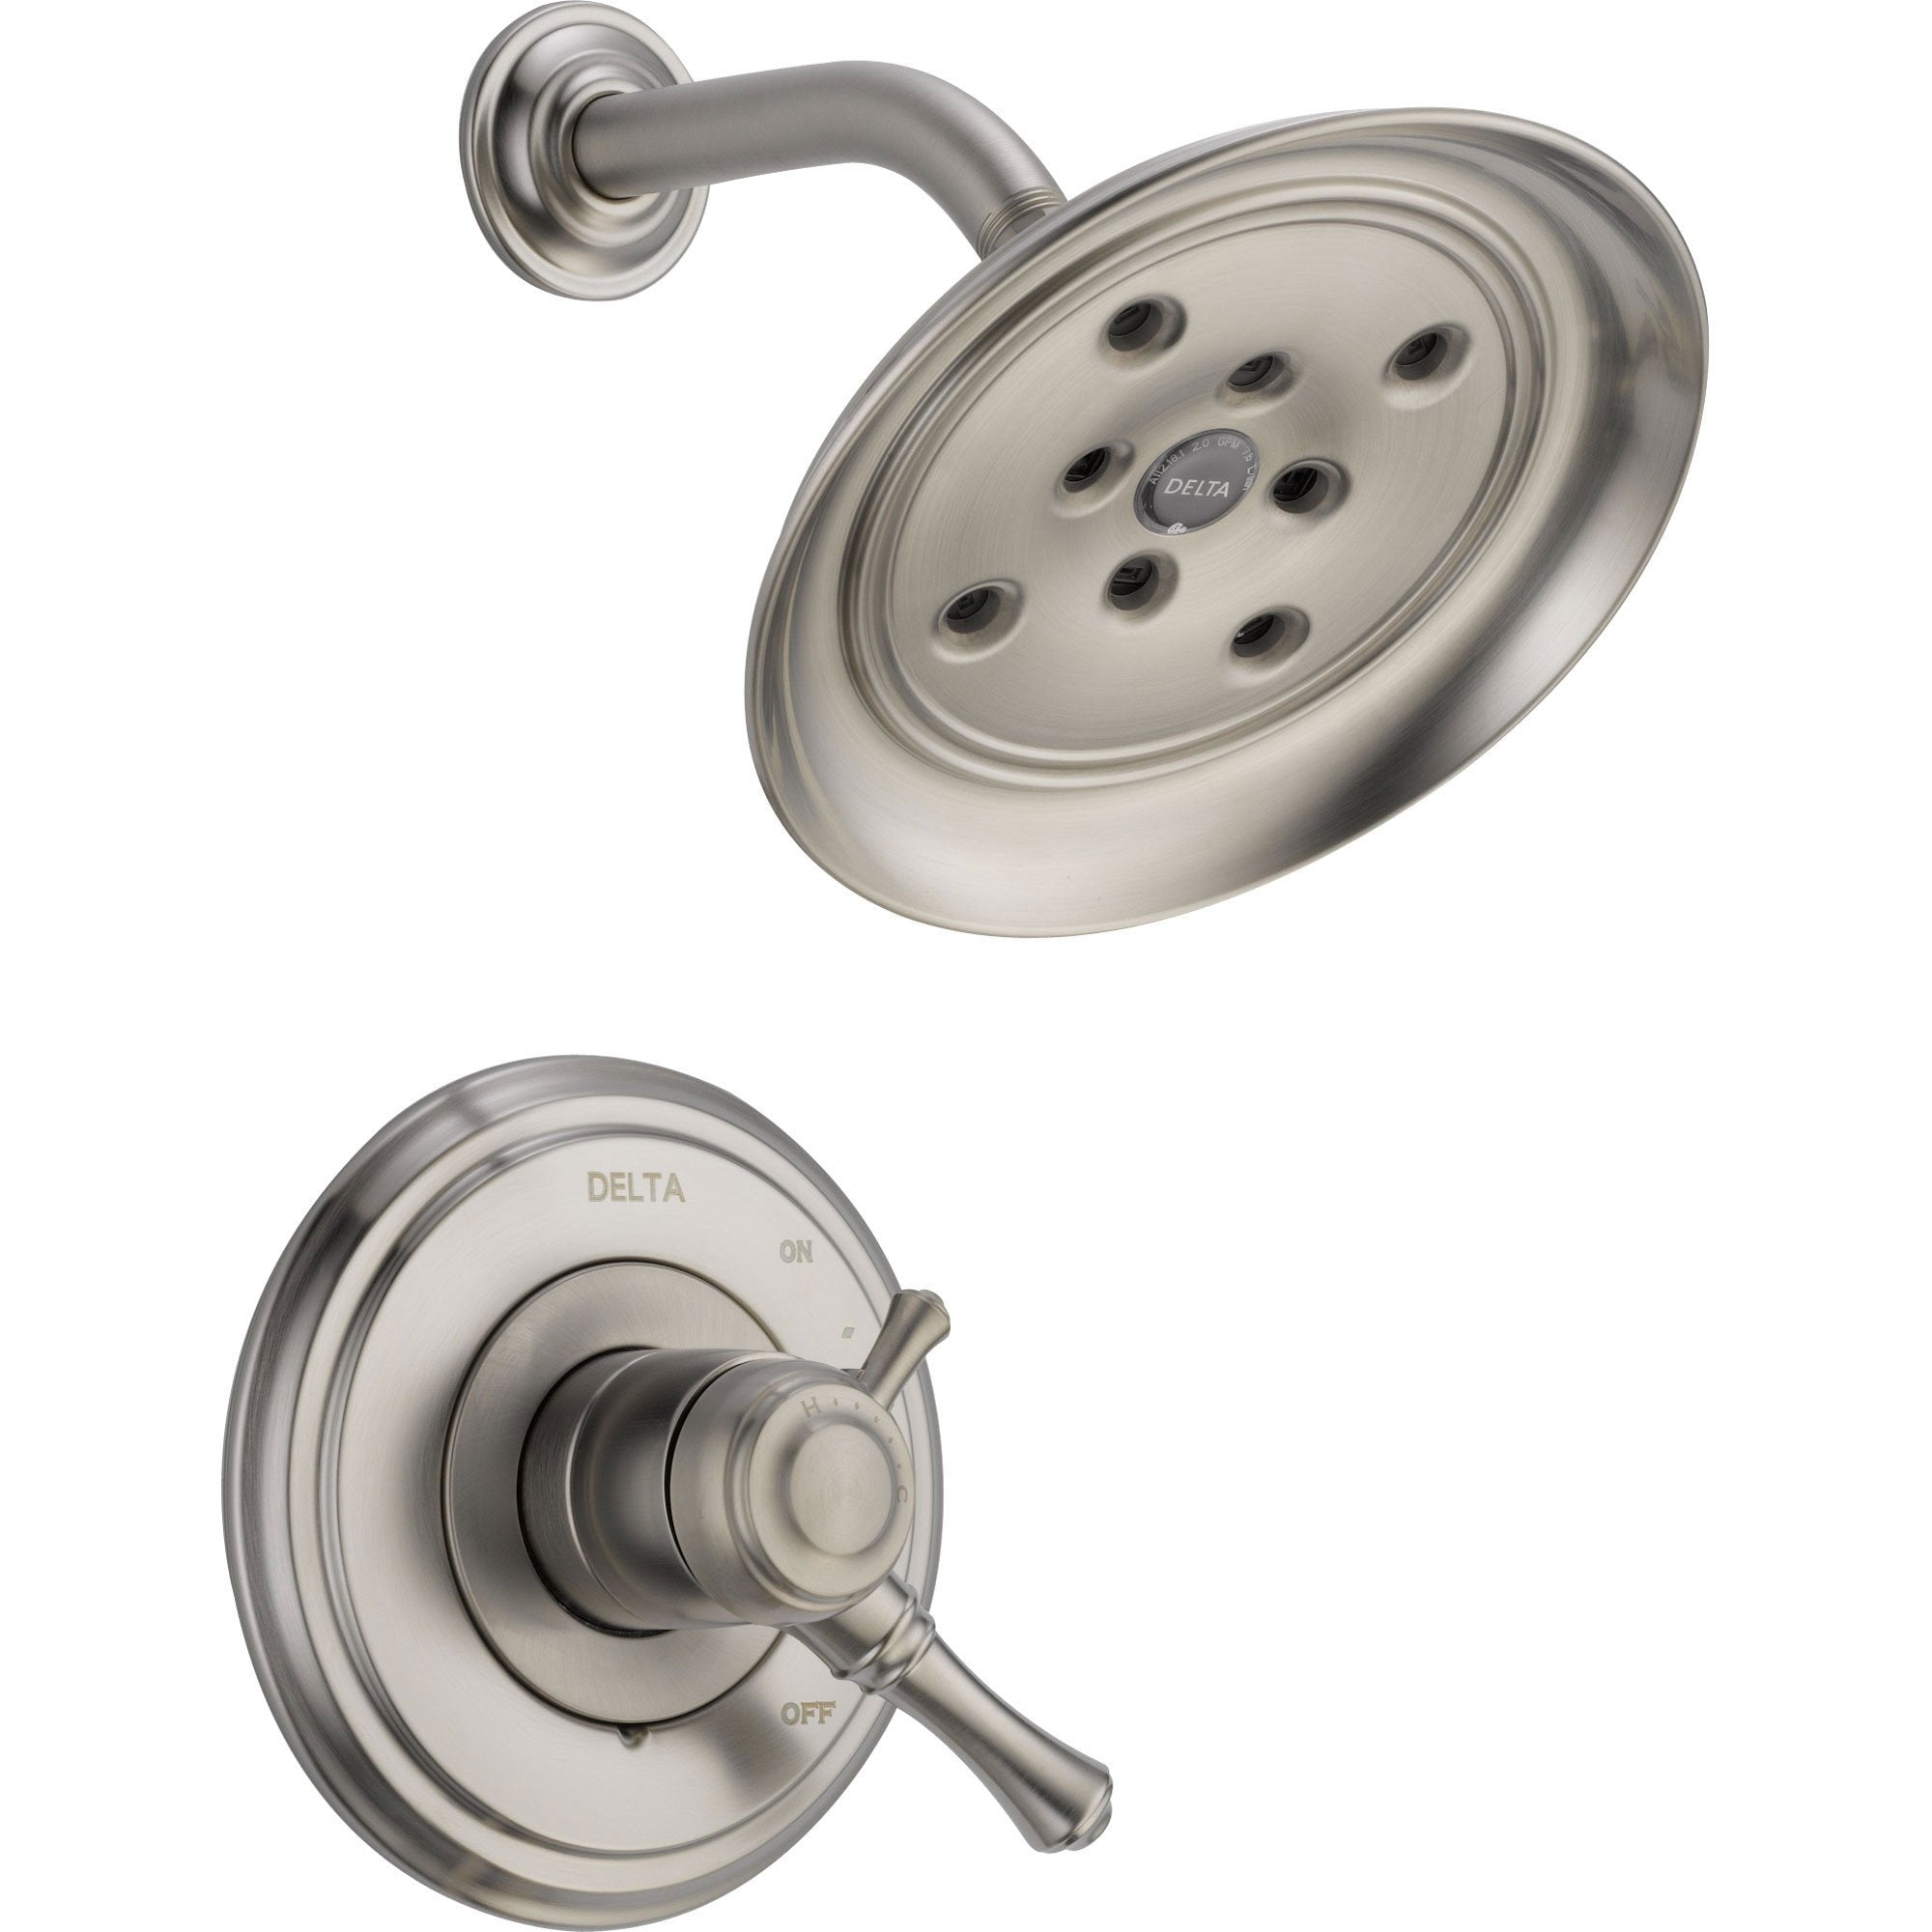 Delta Cassidy Dual Control Stainless Steel Finish Shower Faucet with Valve D726V